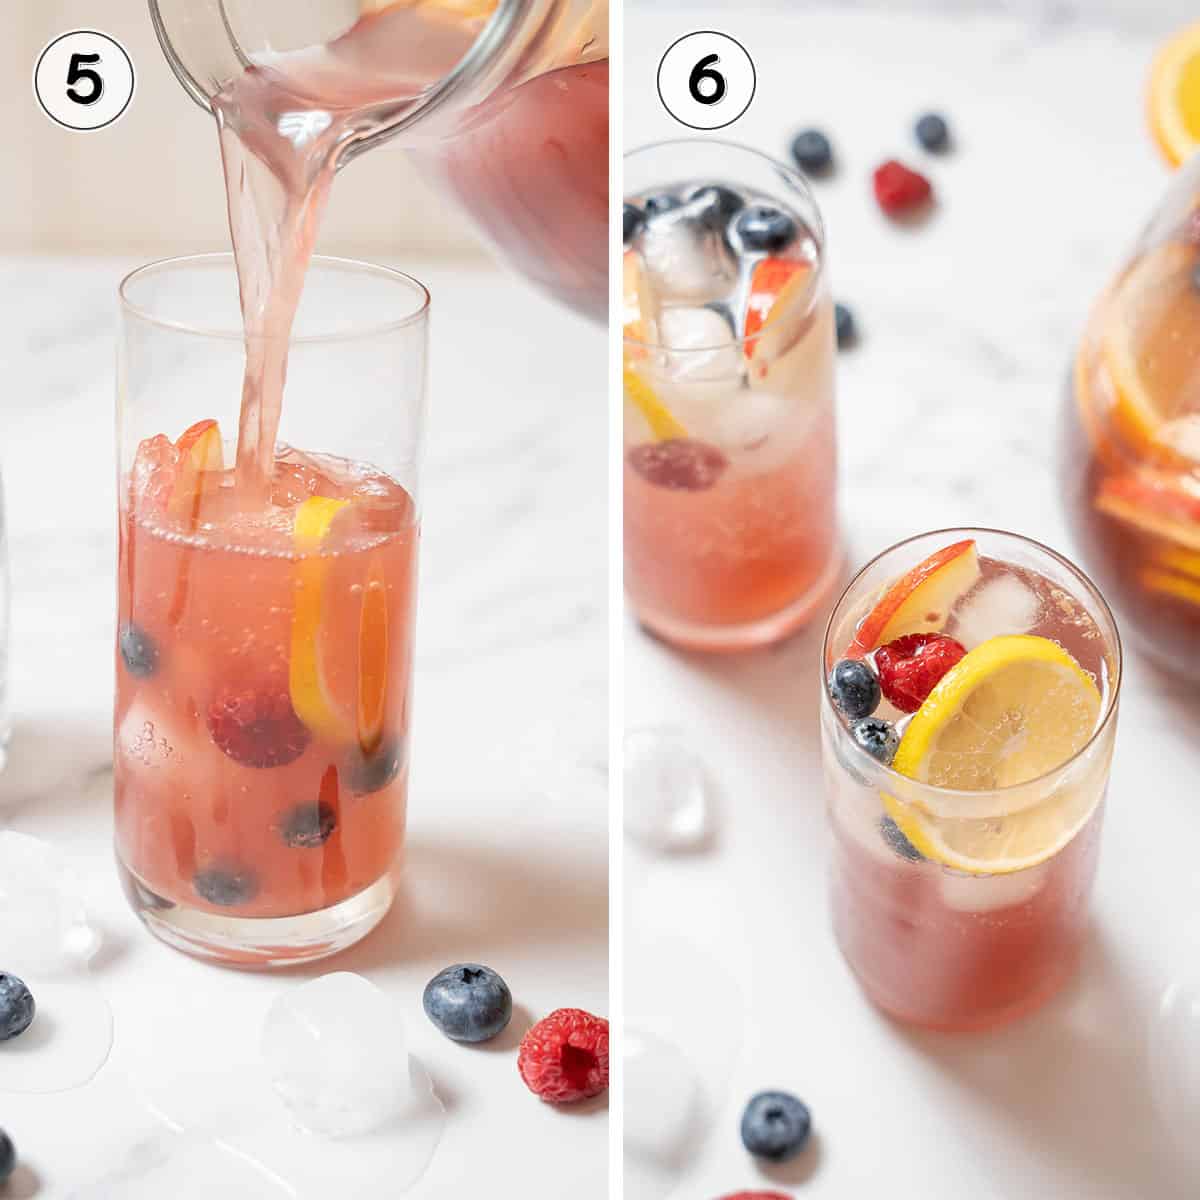 pouring and serving the non-alcoholic sangria.